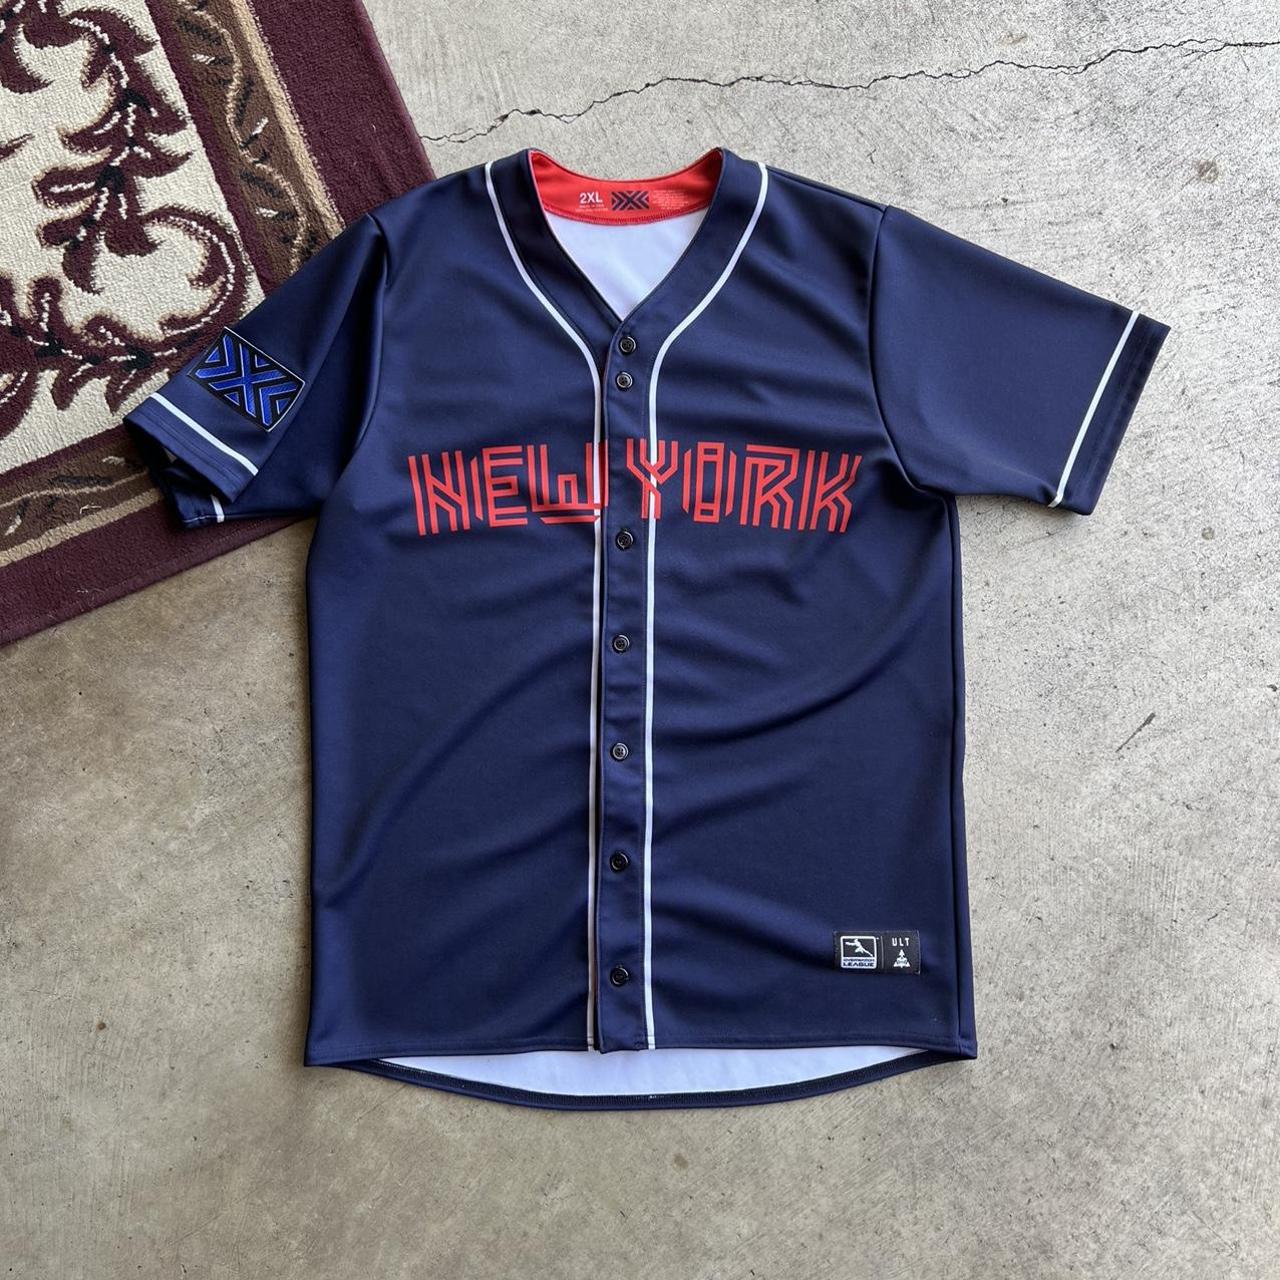 Rare baseball jersey authentic it is polyester - Depop